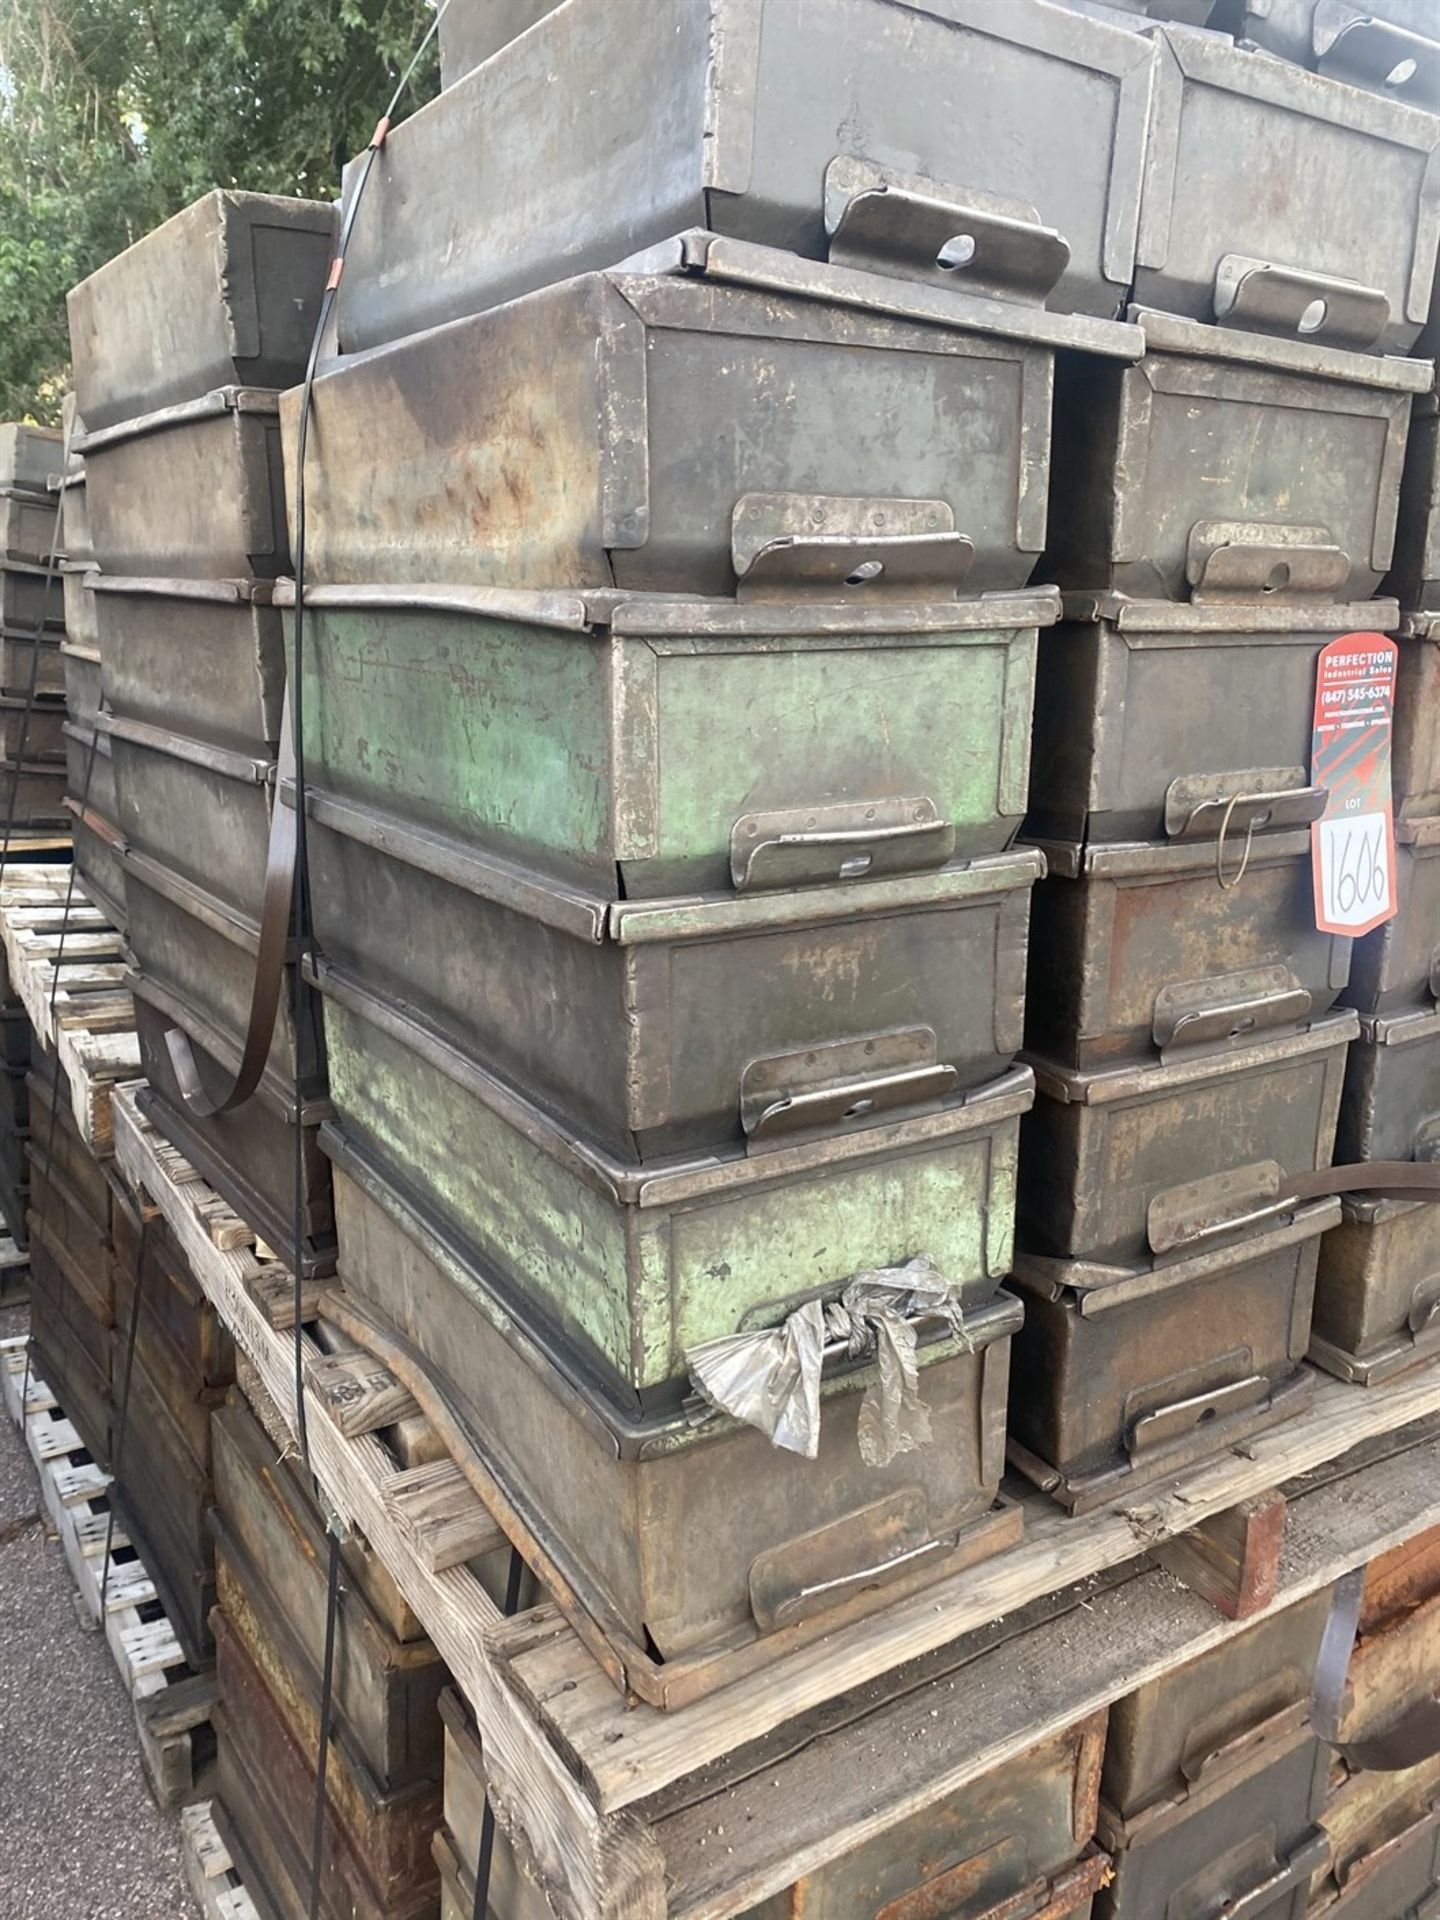 Lot of (12) Pallets of Metal Parts Bins, 20" x 10" x 5" - Image 3 of 3